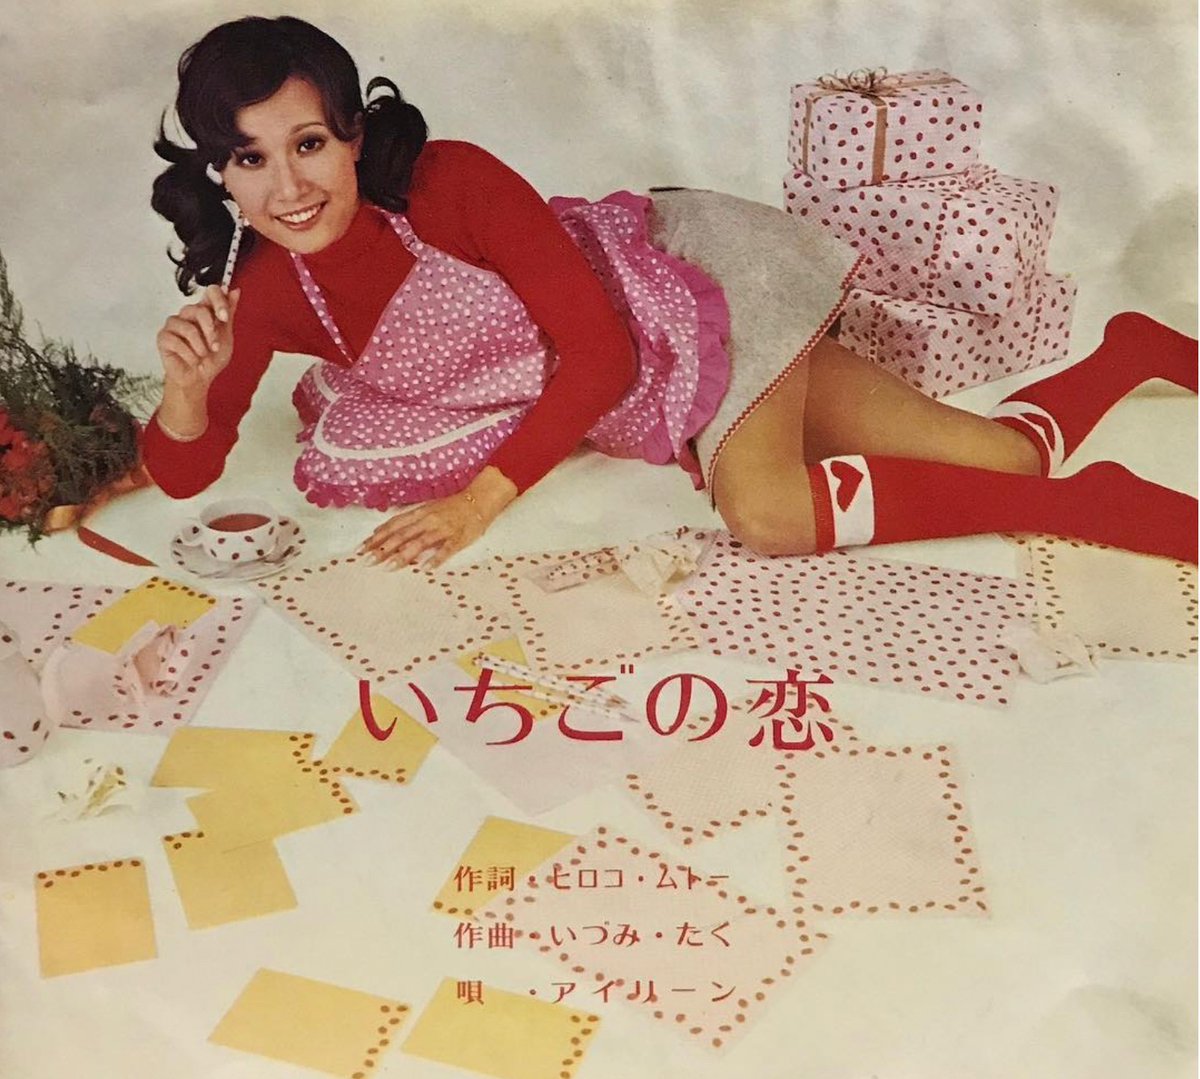 Word of the strawberries’ success inspired Shintaro Tsuji, who ran a struggling firm called Yamanashi Silk Center. He put strawberry motifs on kidswear: rubber sandals, handkerchiefs, small pouches & cups. They sold like wildfire. Seems obvious now; but blew peoples’ minds. (7/x